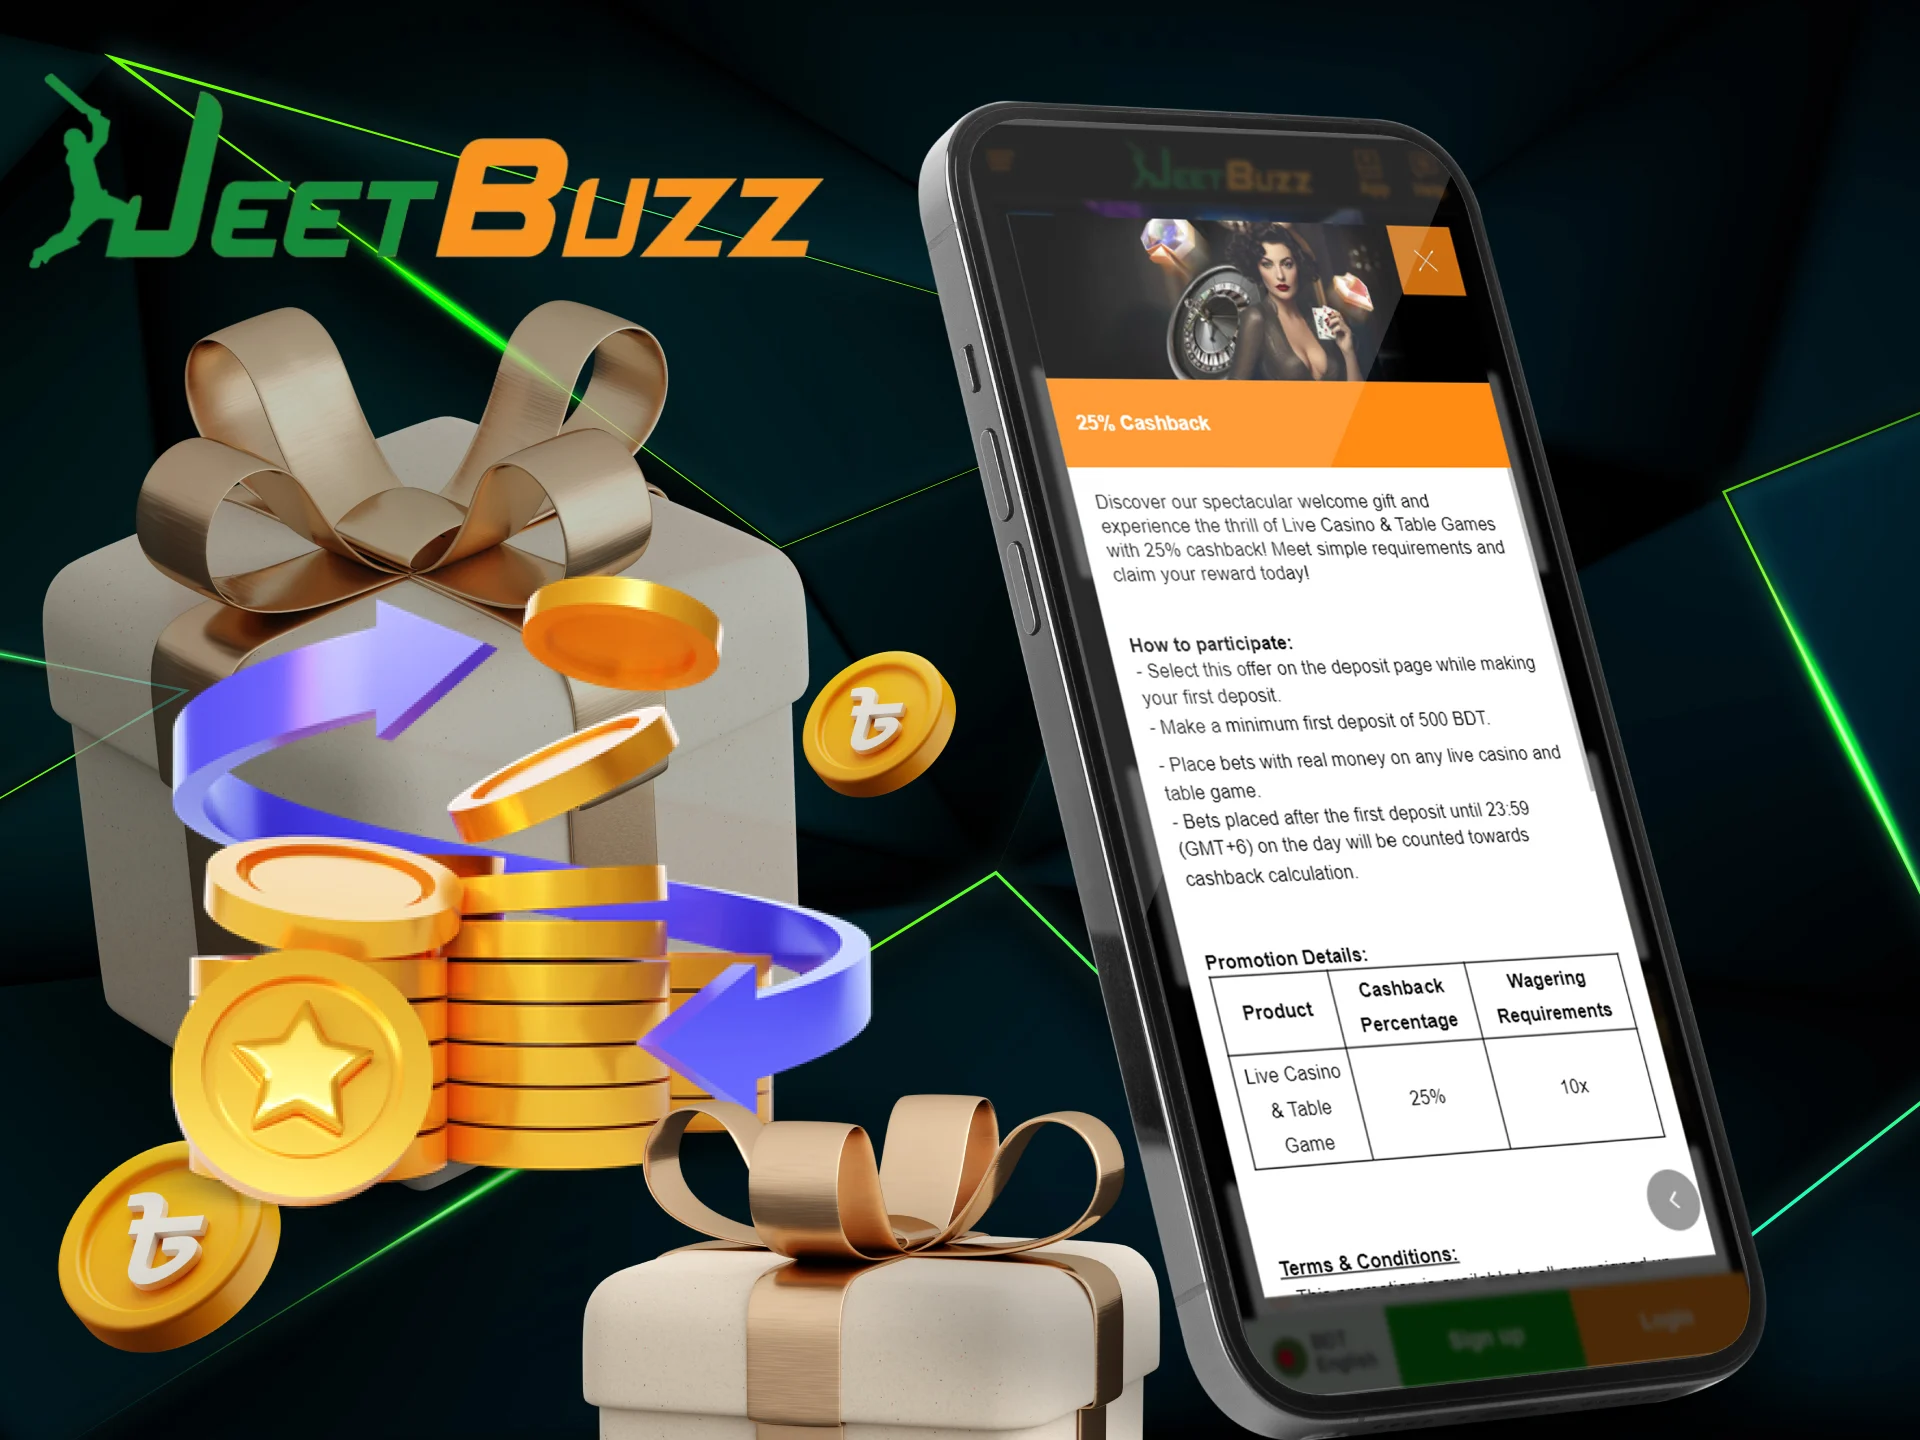 Get 25% cashback on live casino and table games on the JeetBuzz app.